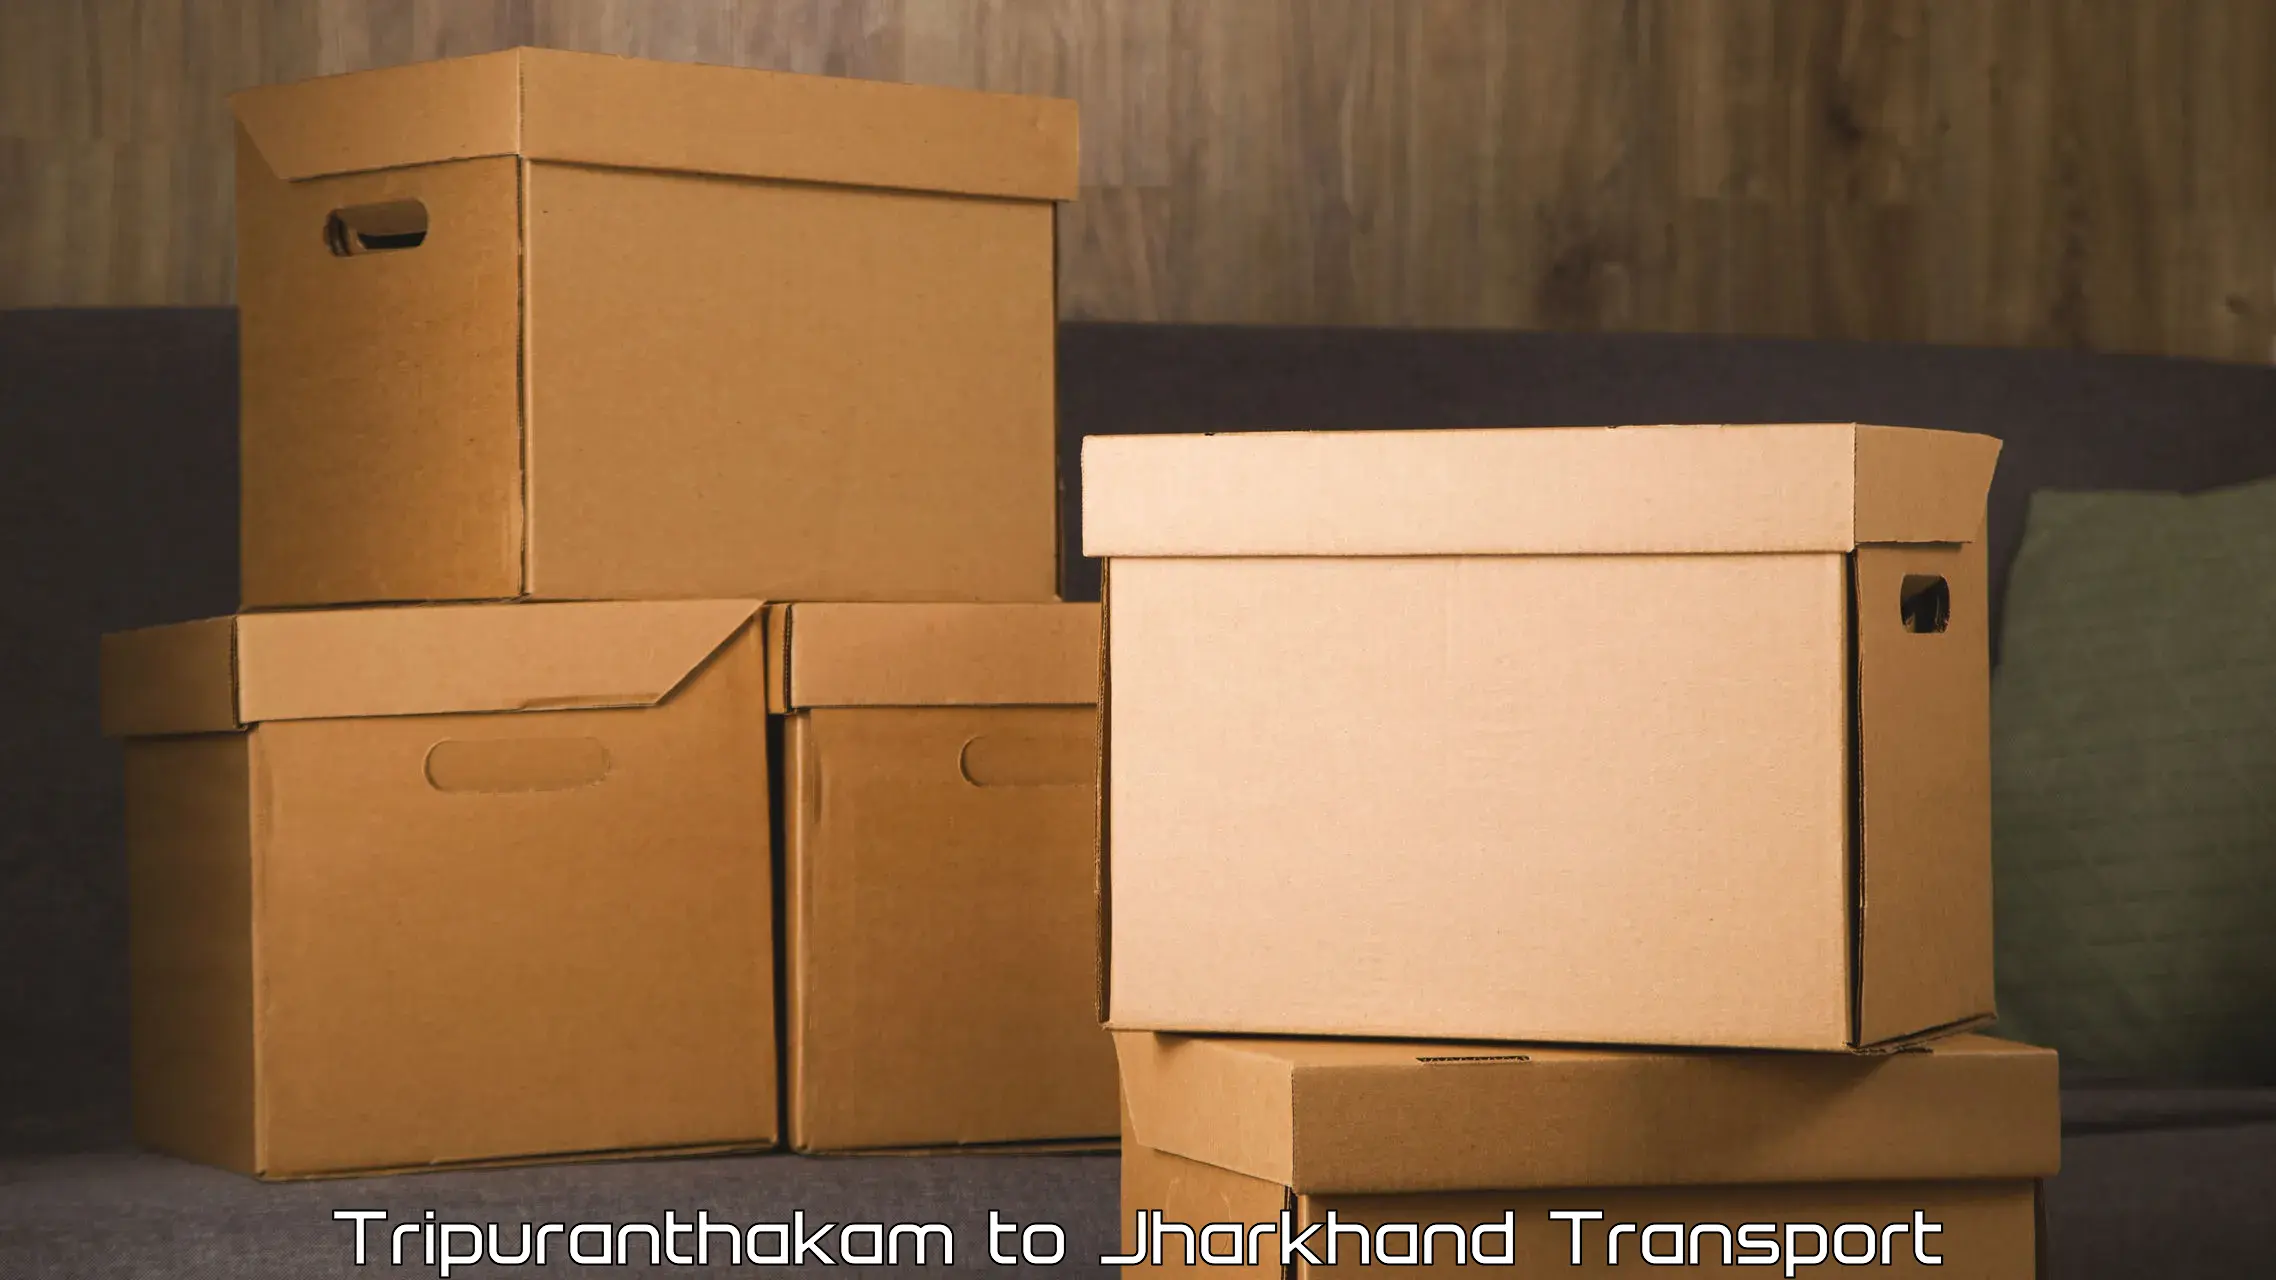 Parcel transport services in Tripuranthakam to Jharkhand